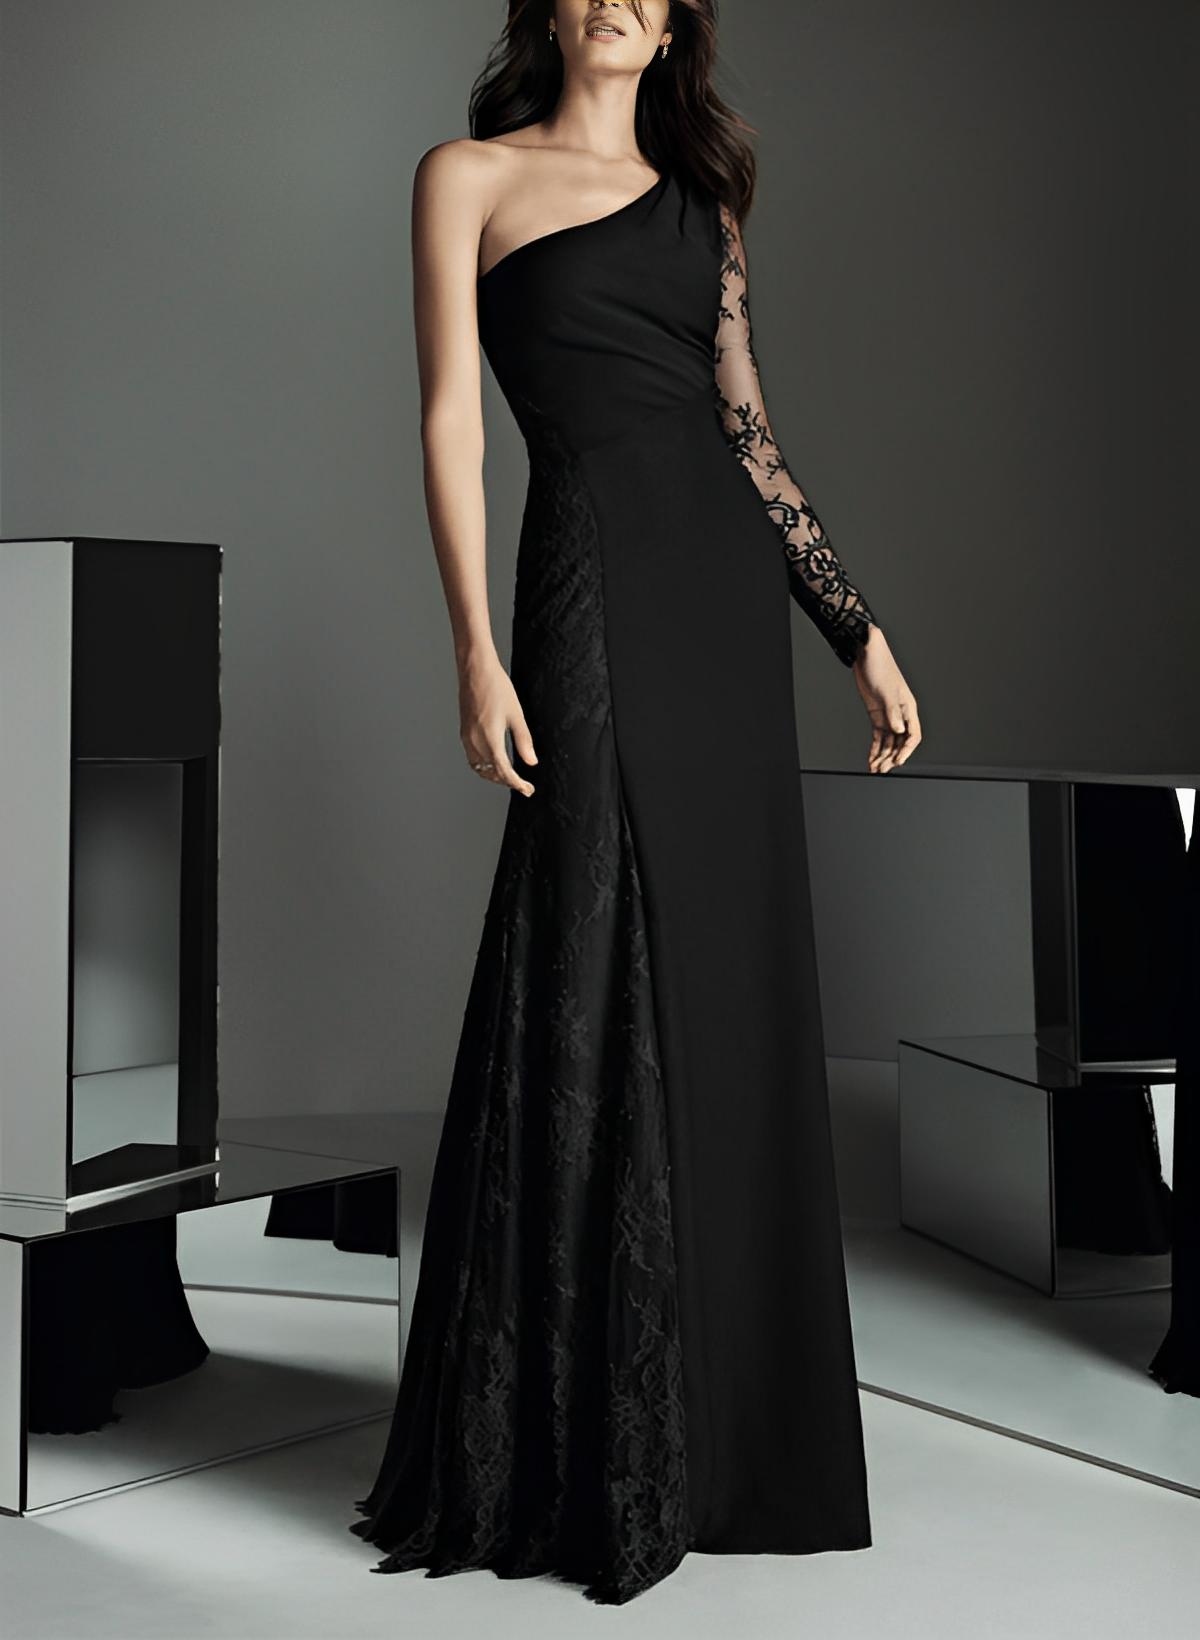 Elegant One-Shoulder Long Sleeves Floor-Length Mother Of The Bride Dresses With Lace